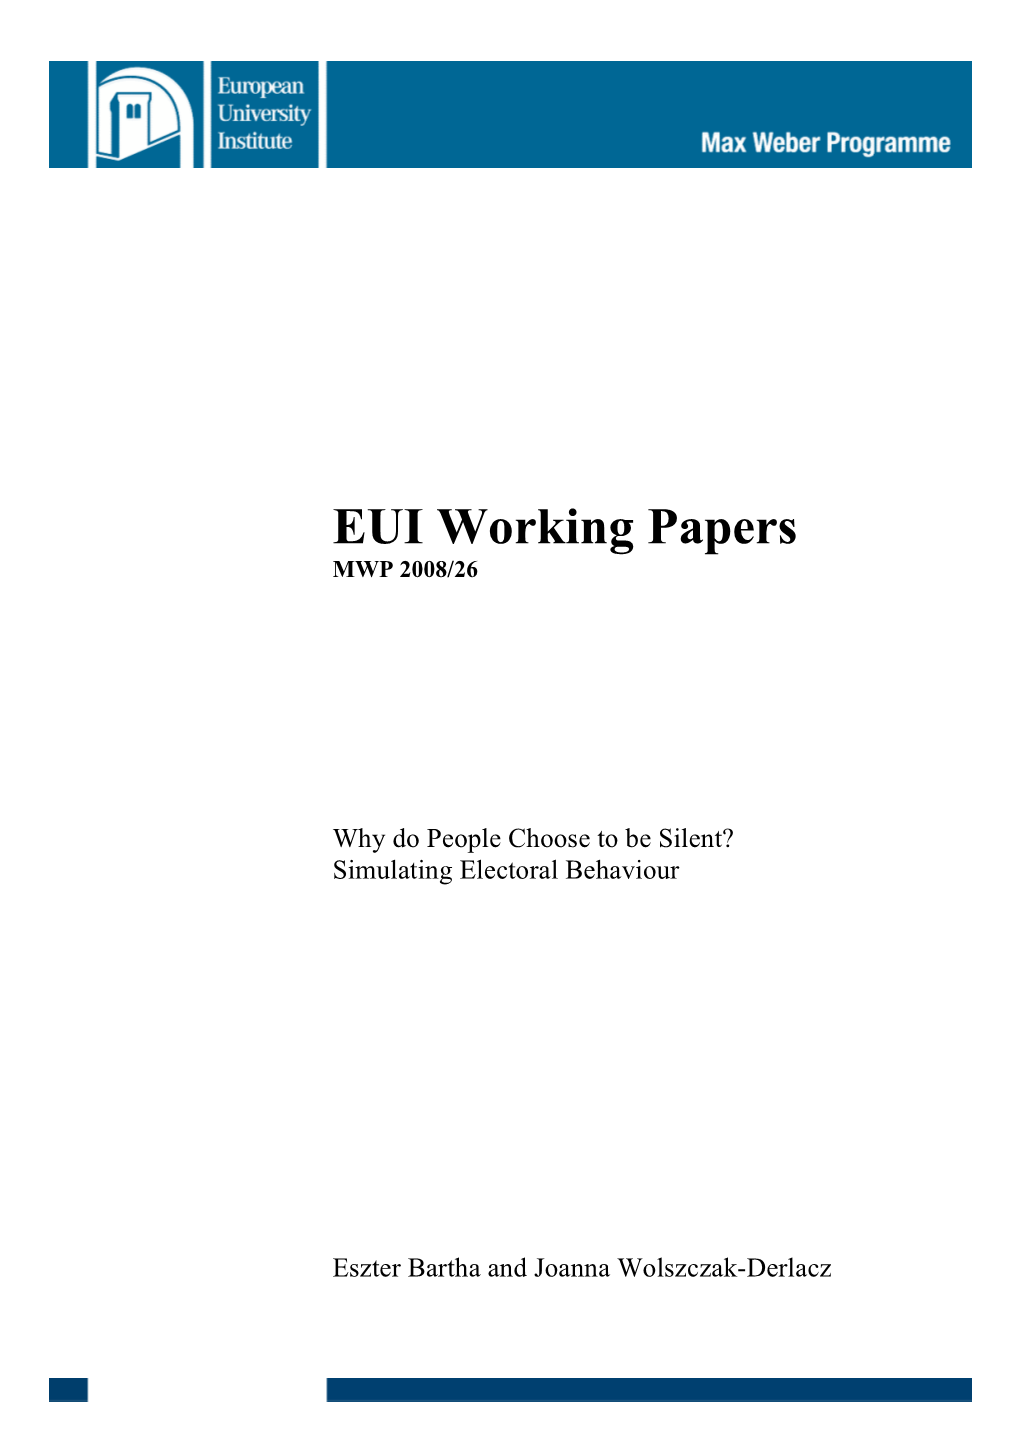 EUI Working Papers MWP 2008/26